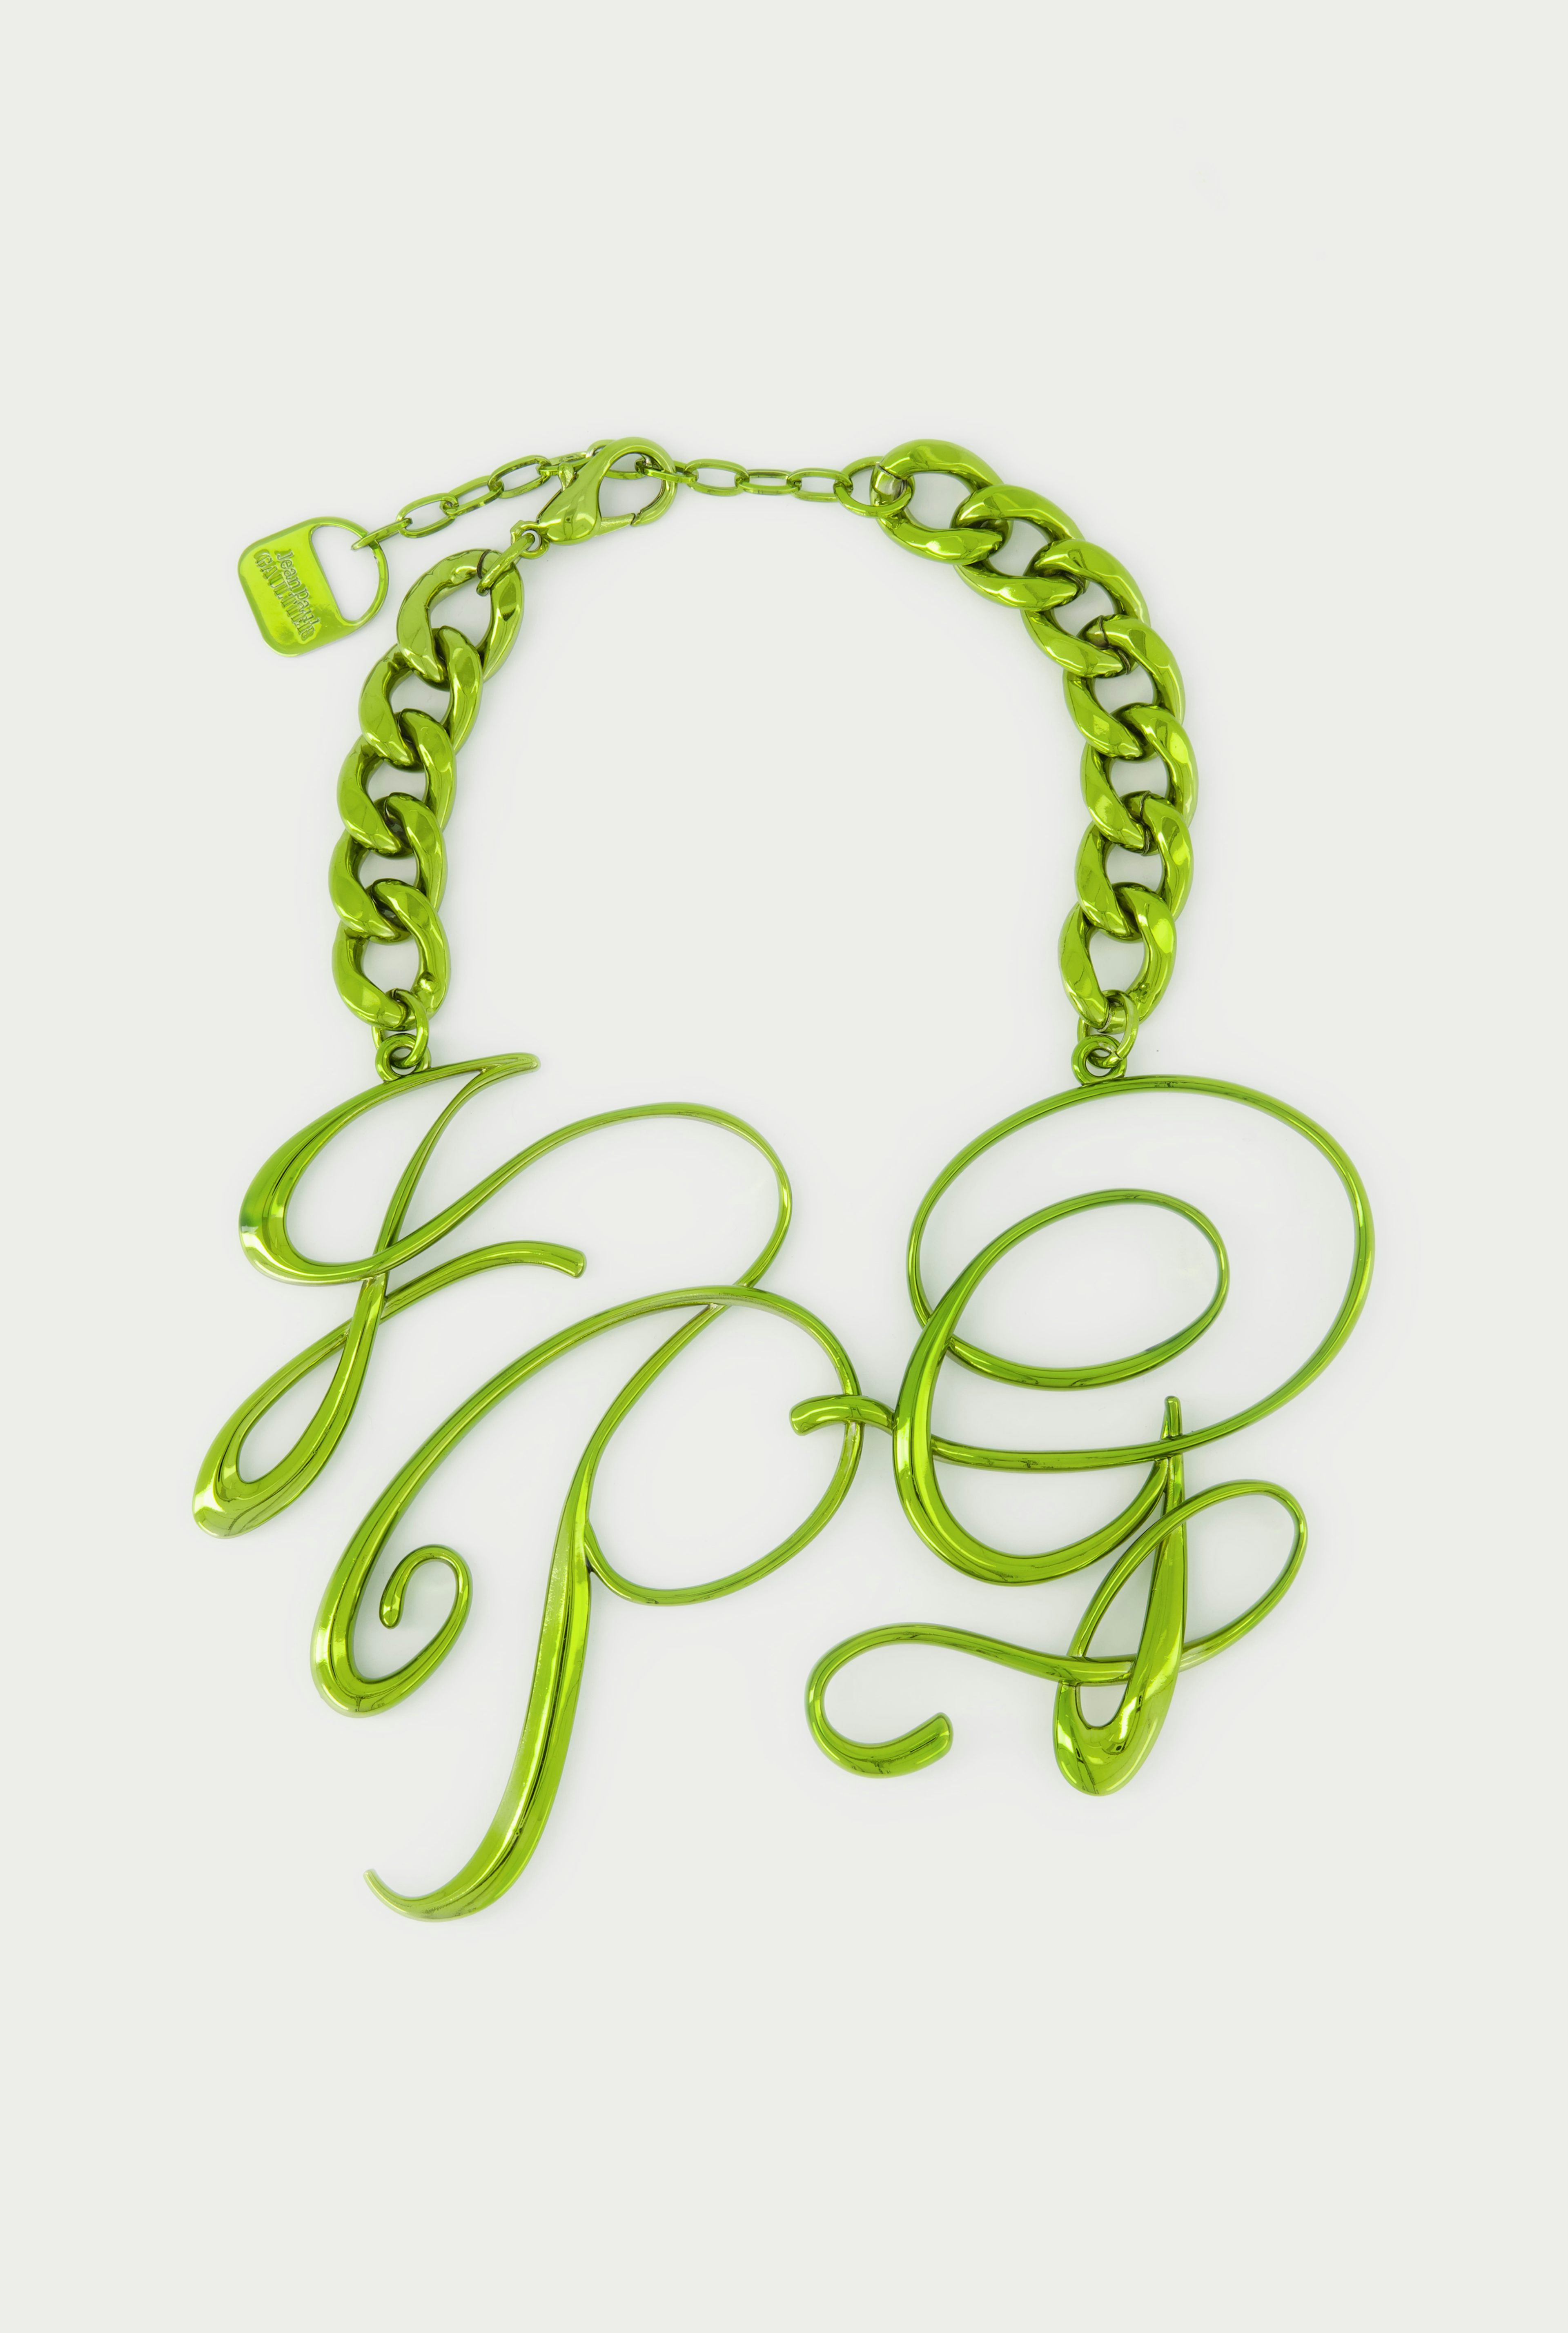 The JPG Calligraphy Necklace hover